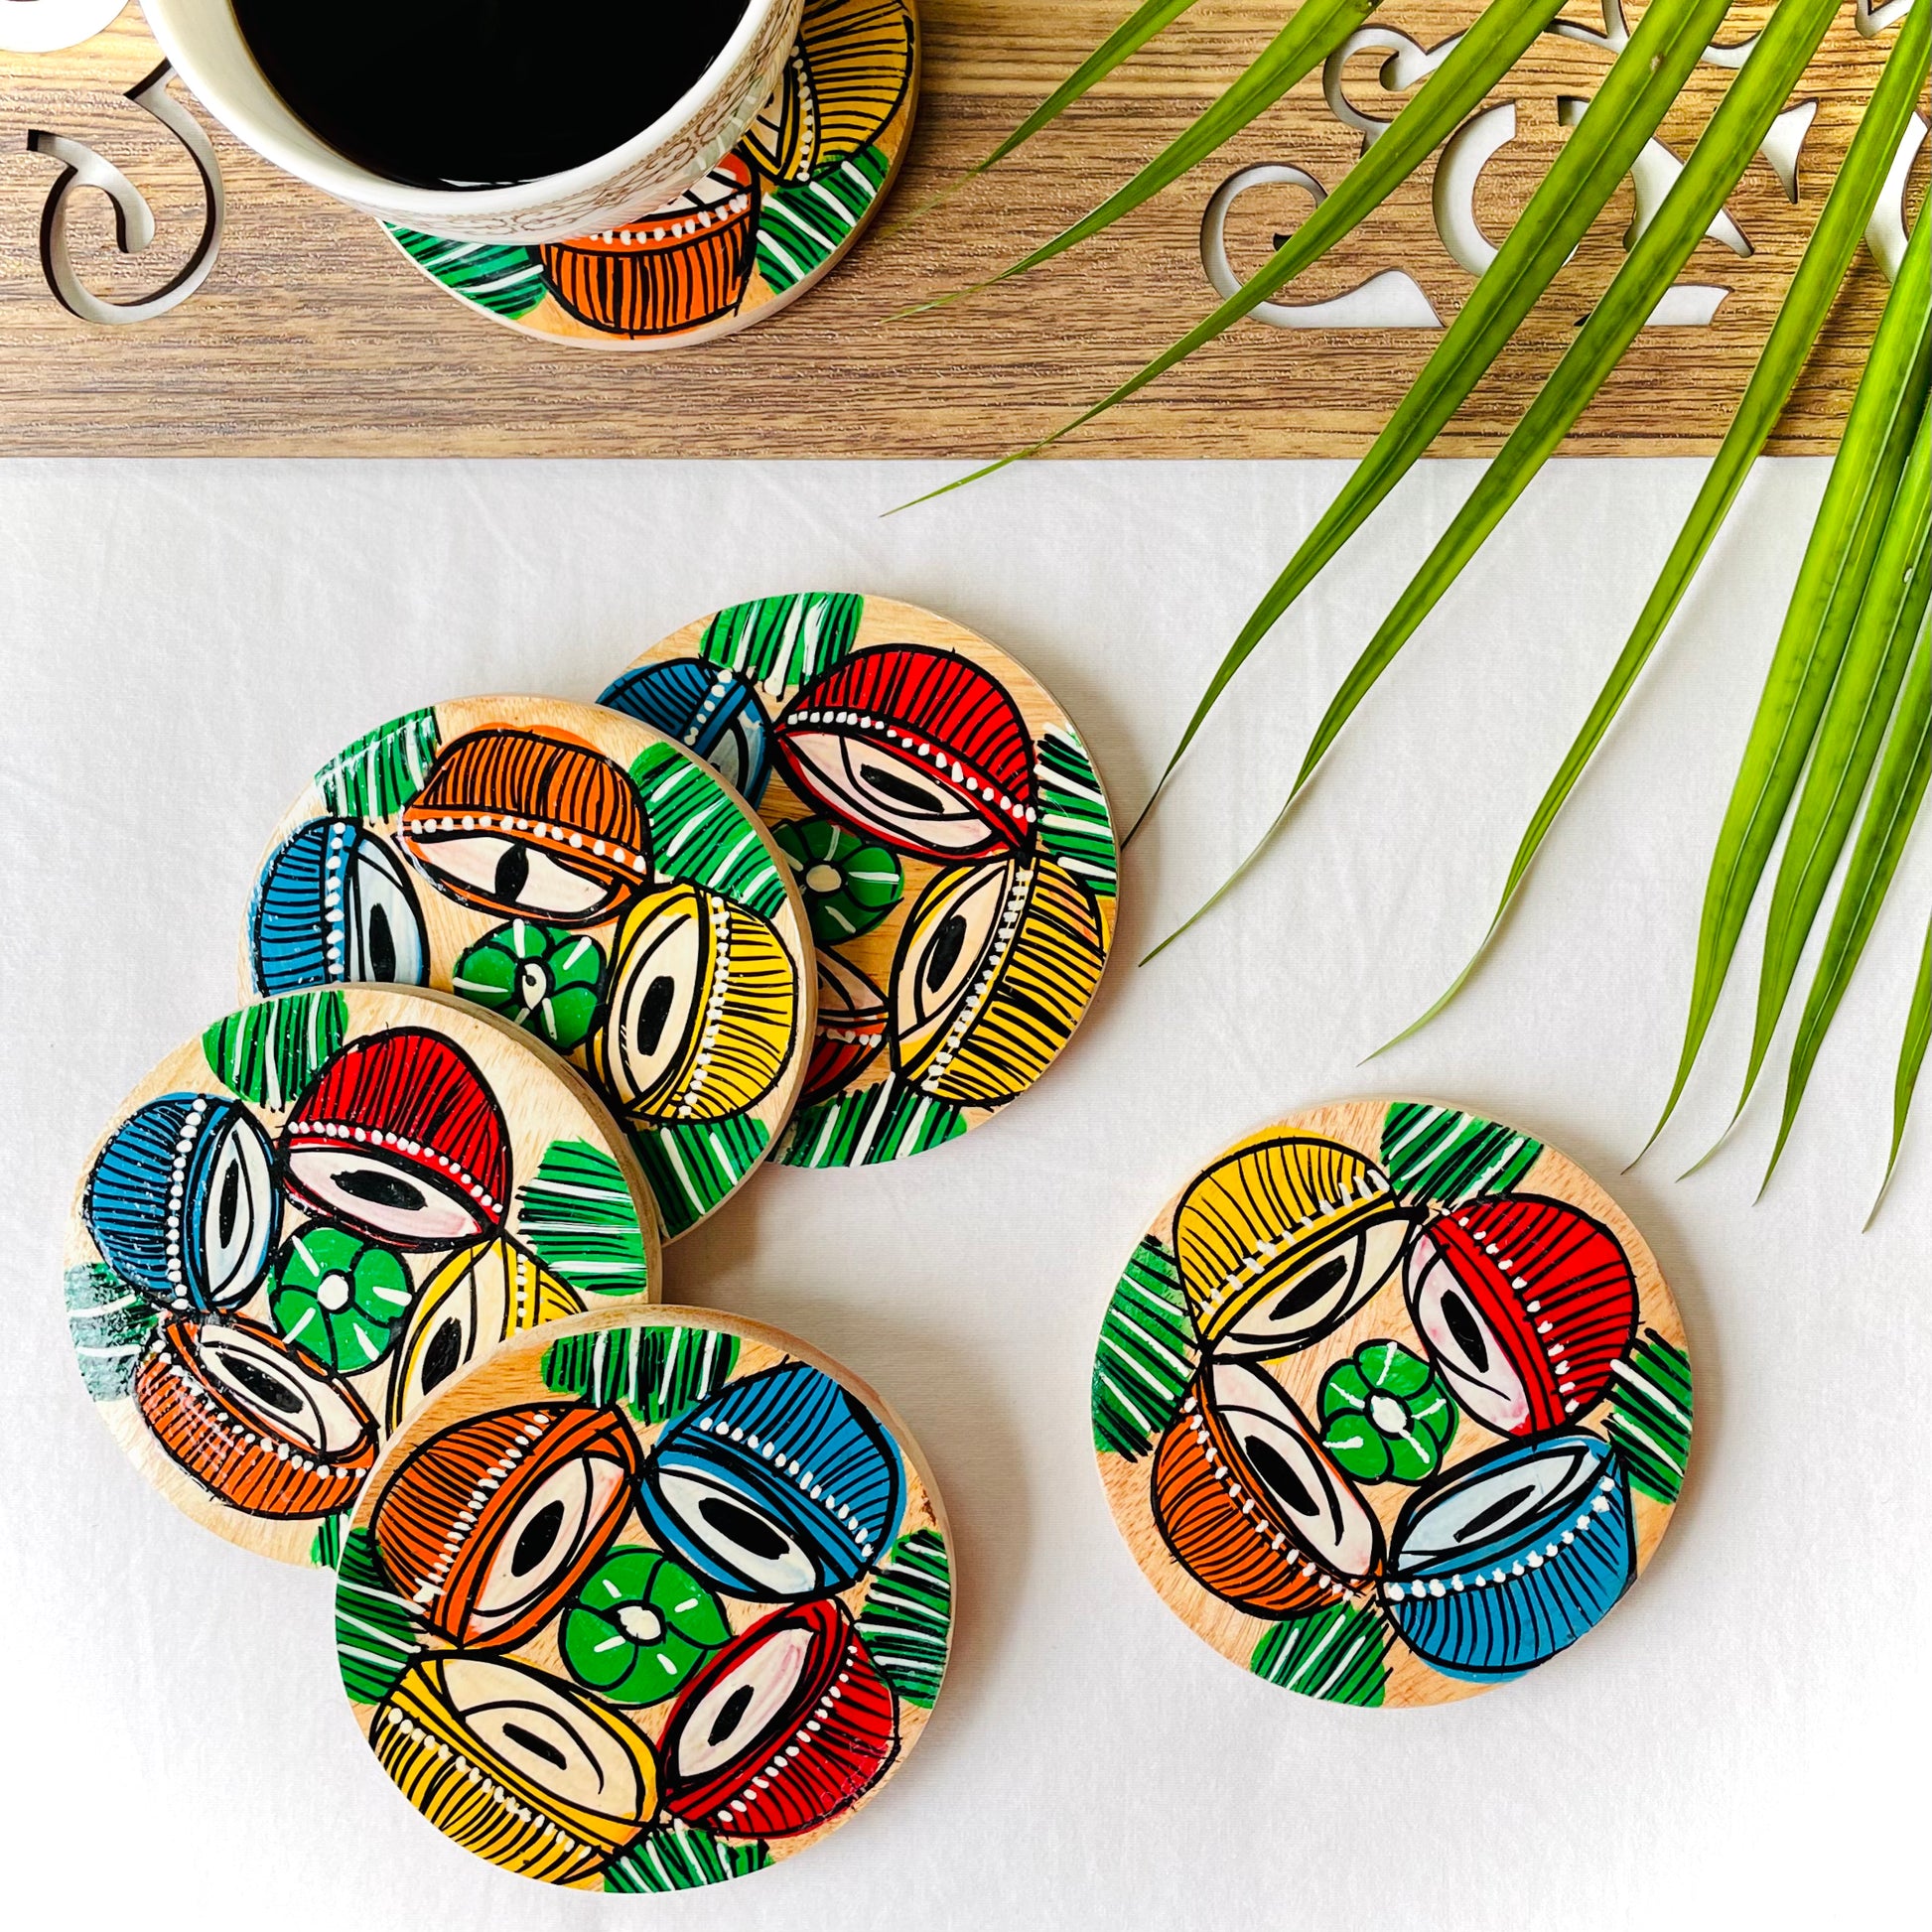 Five pure mango wood round wood coasters painted with four tablas, a type of Indian classical musical instrument in each wood coaster are placed near a teacup filled with black tea with leaves in the background